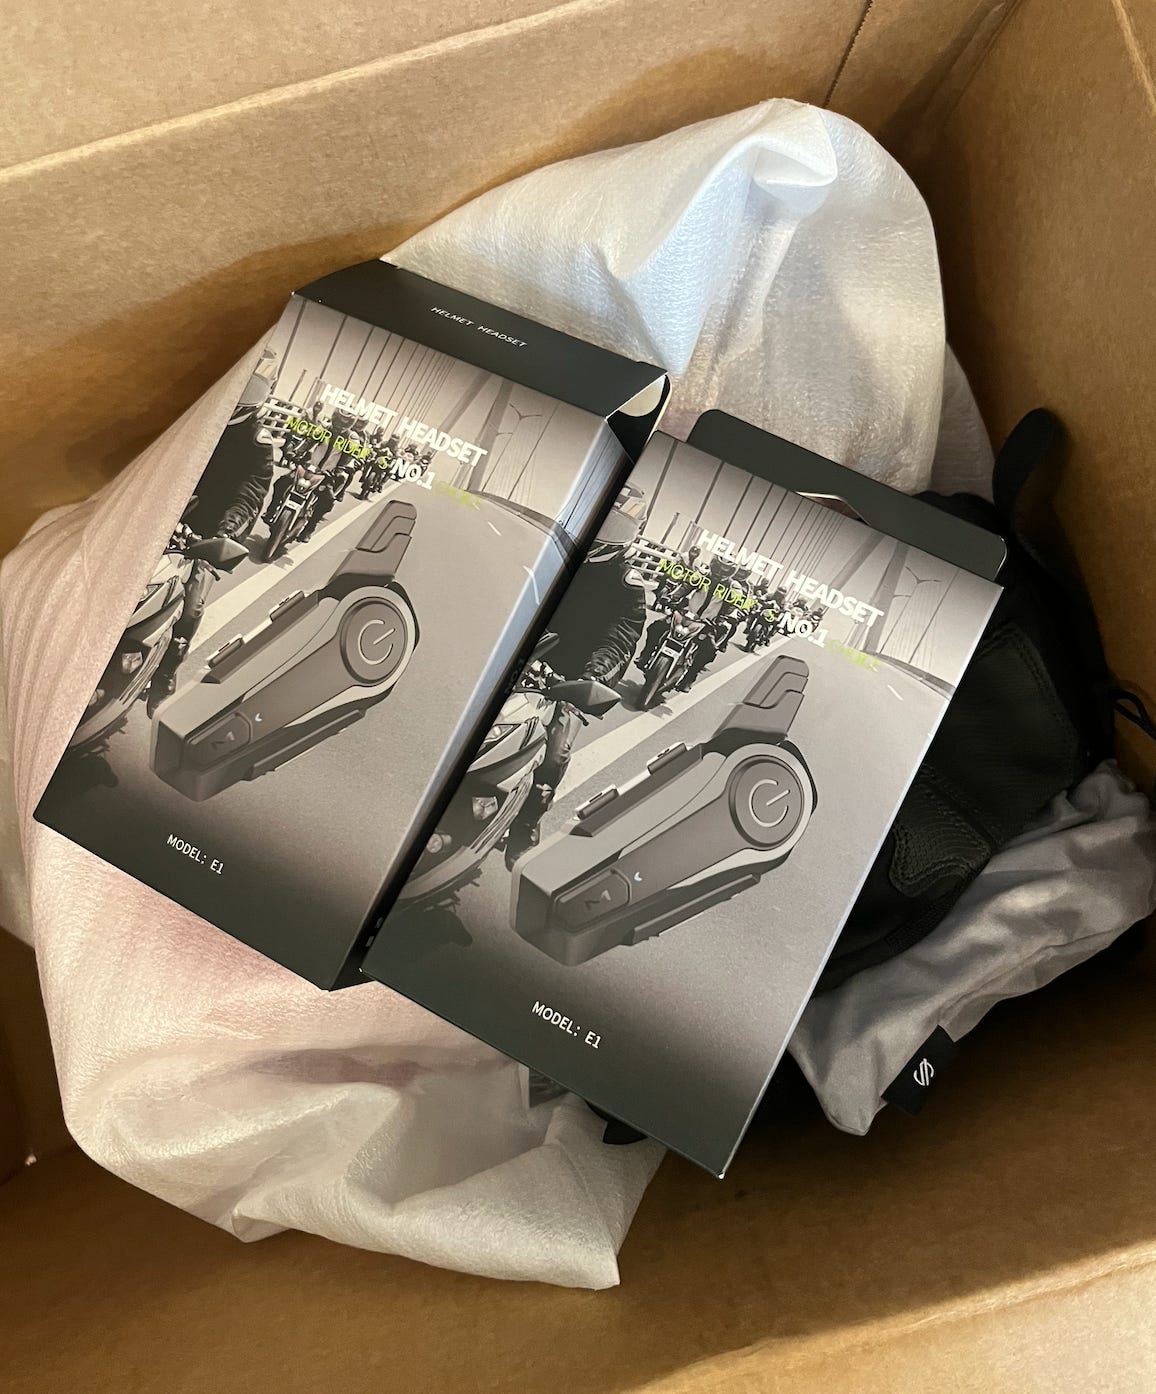 A look inside an open shipping box. Two packages for bluetooth "Helmet Headsets" rest on top of white protective cover for Amber's motorcycle helmet.